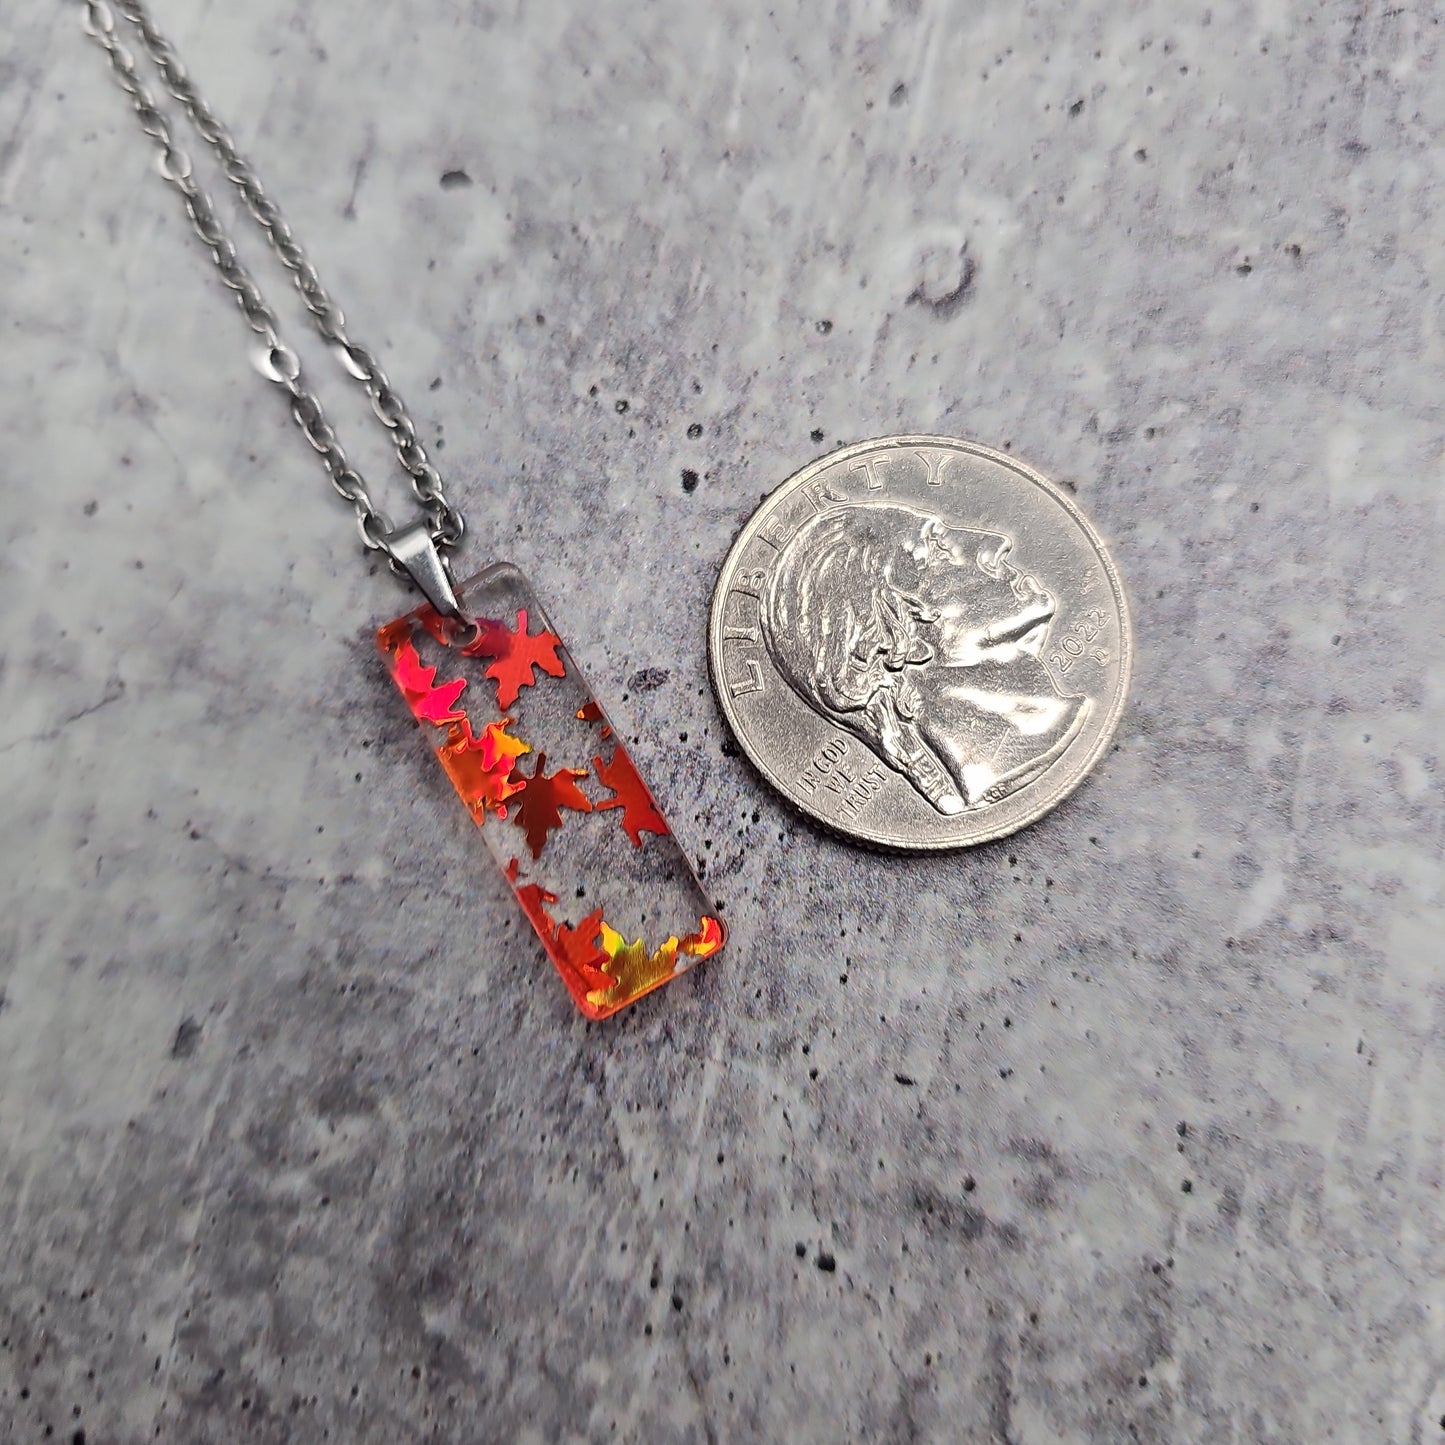 Small Rectangle Orange Falling Leaves Necklace